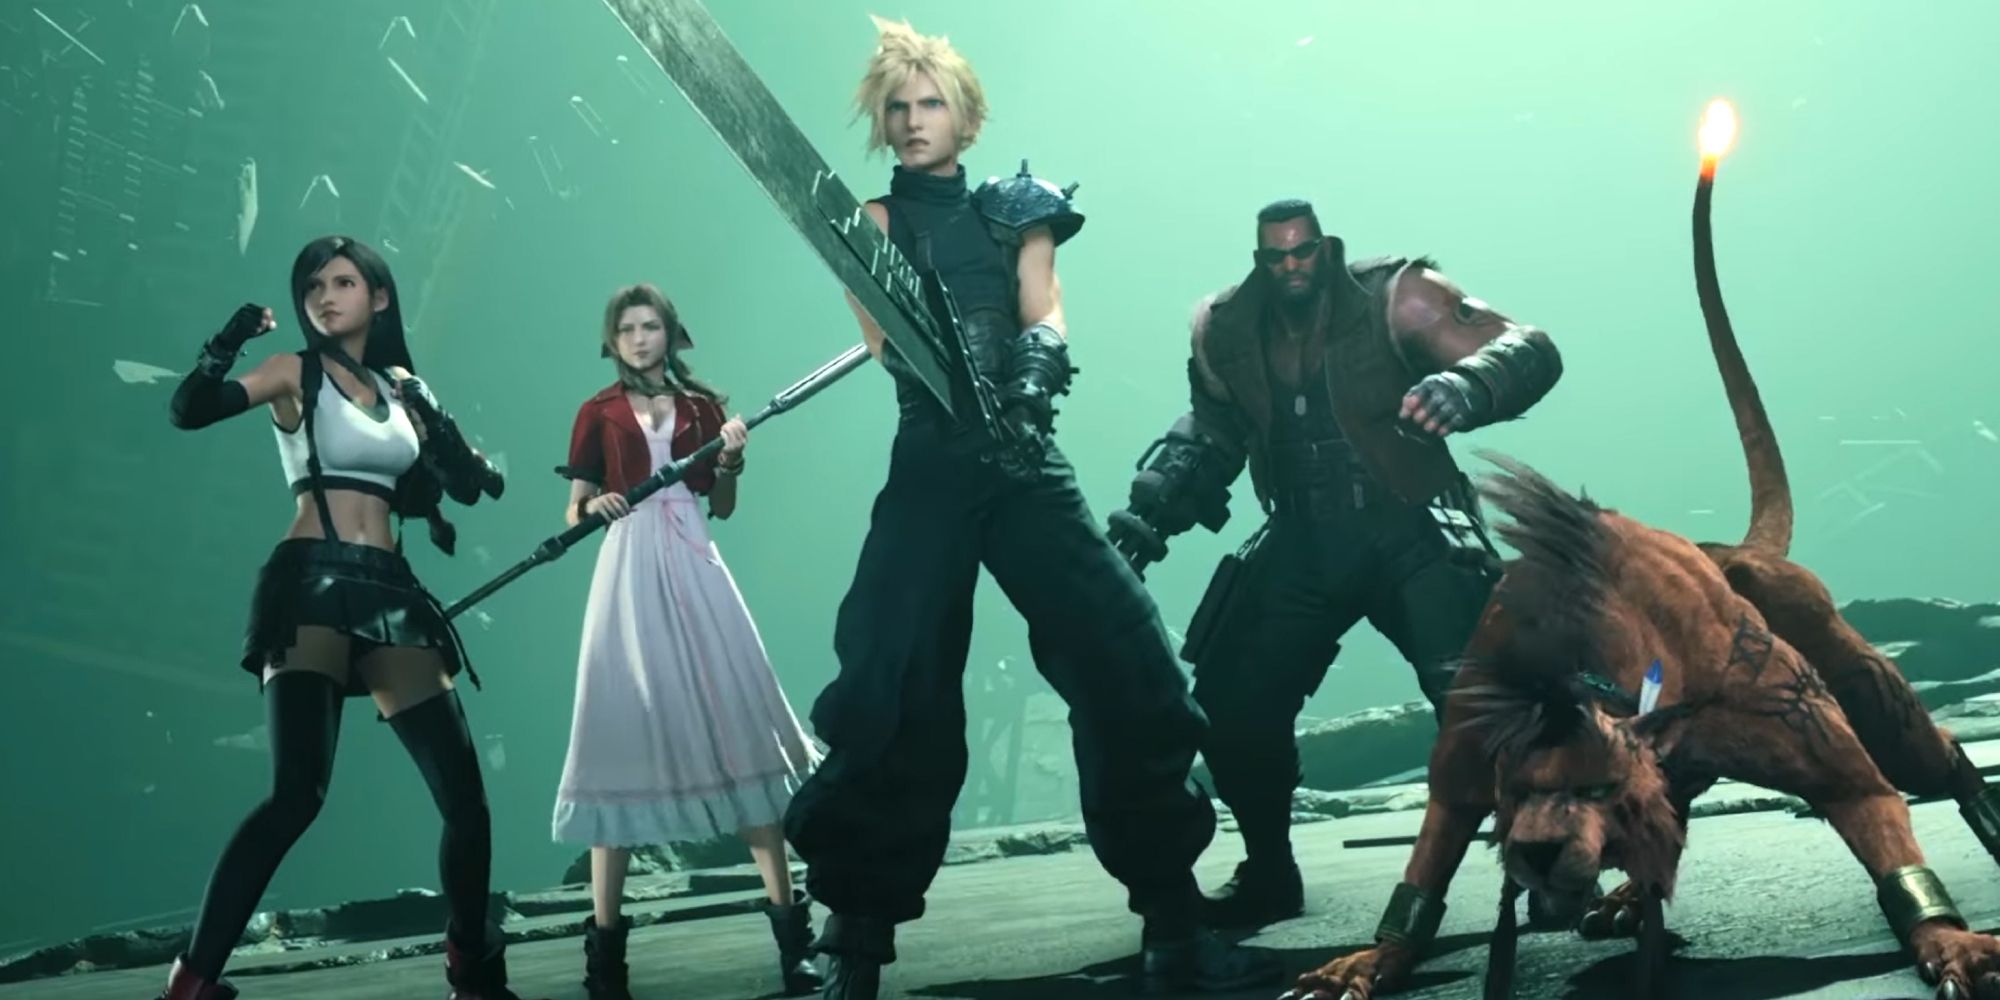 Tifa, Aerith, Cloud, Barrett and Red 13 from Final Fantasy 7 Remake